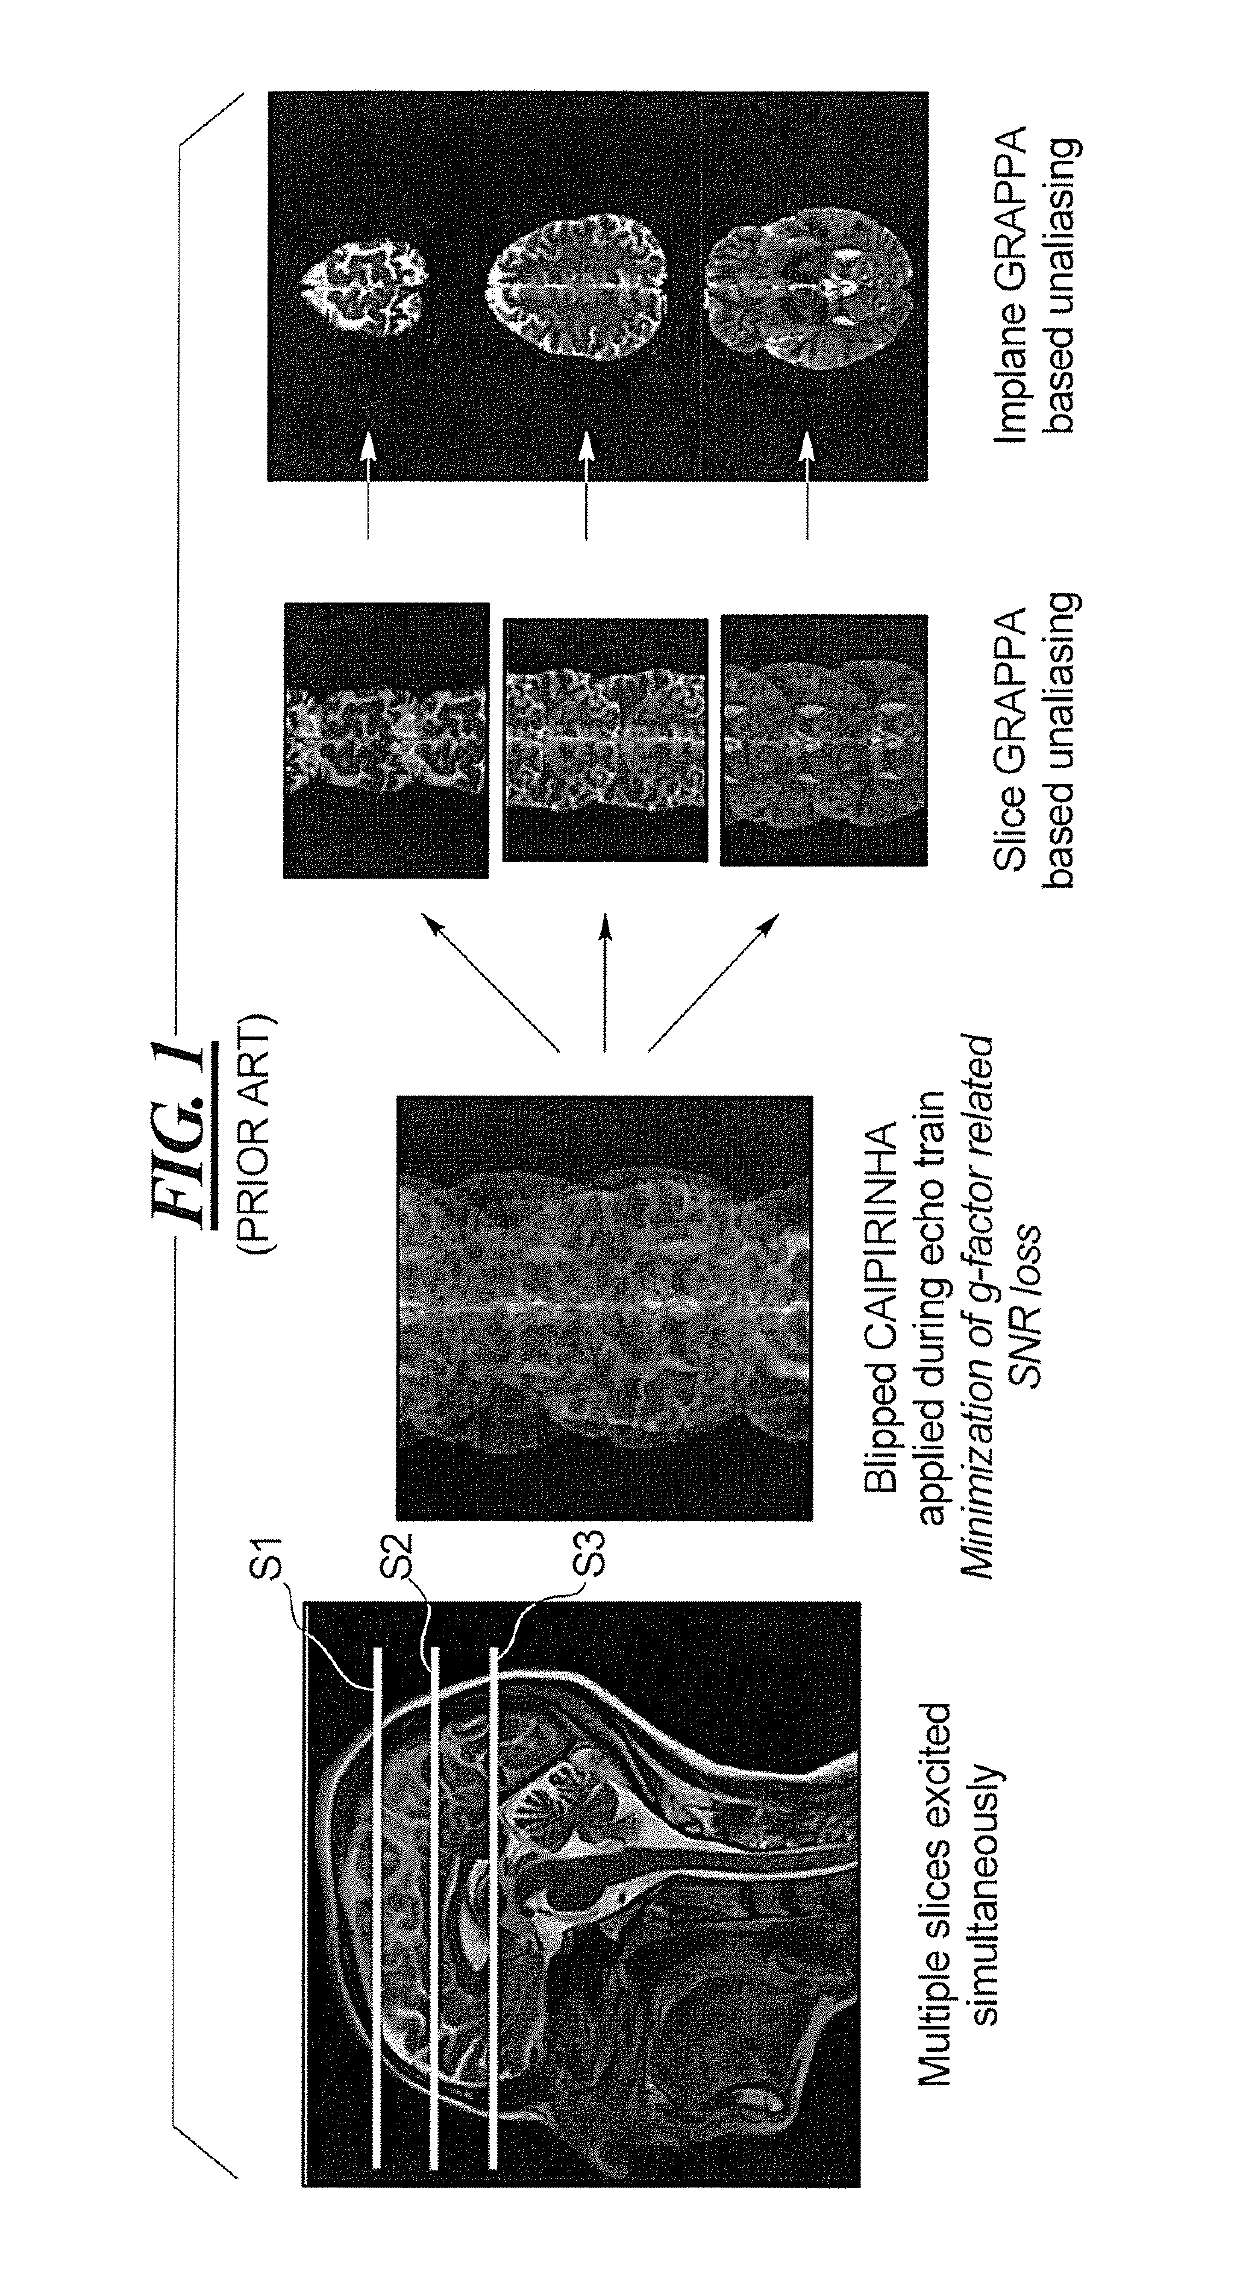 Multi-contrast simultaneous multislice magnetic resonance imaging with binomial radio-frequency pulses